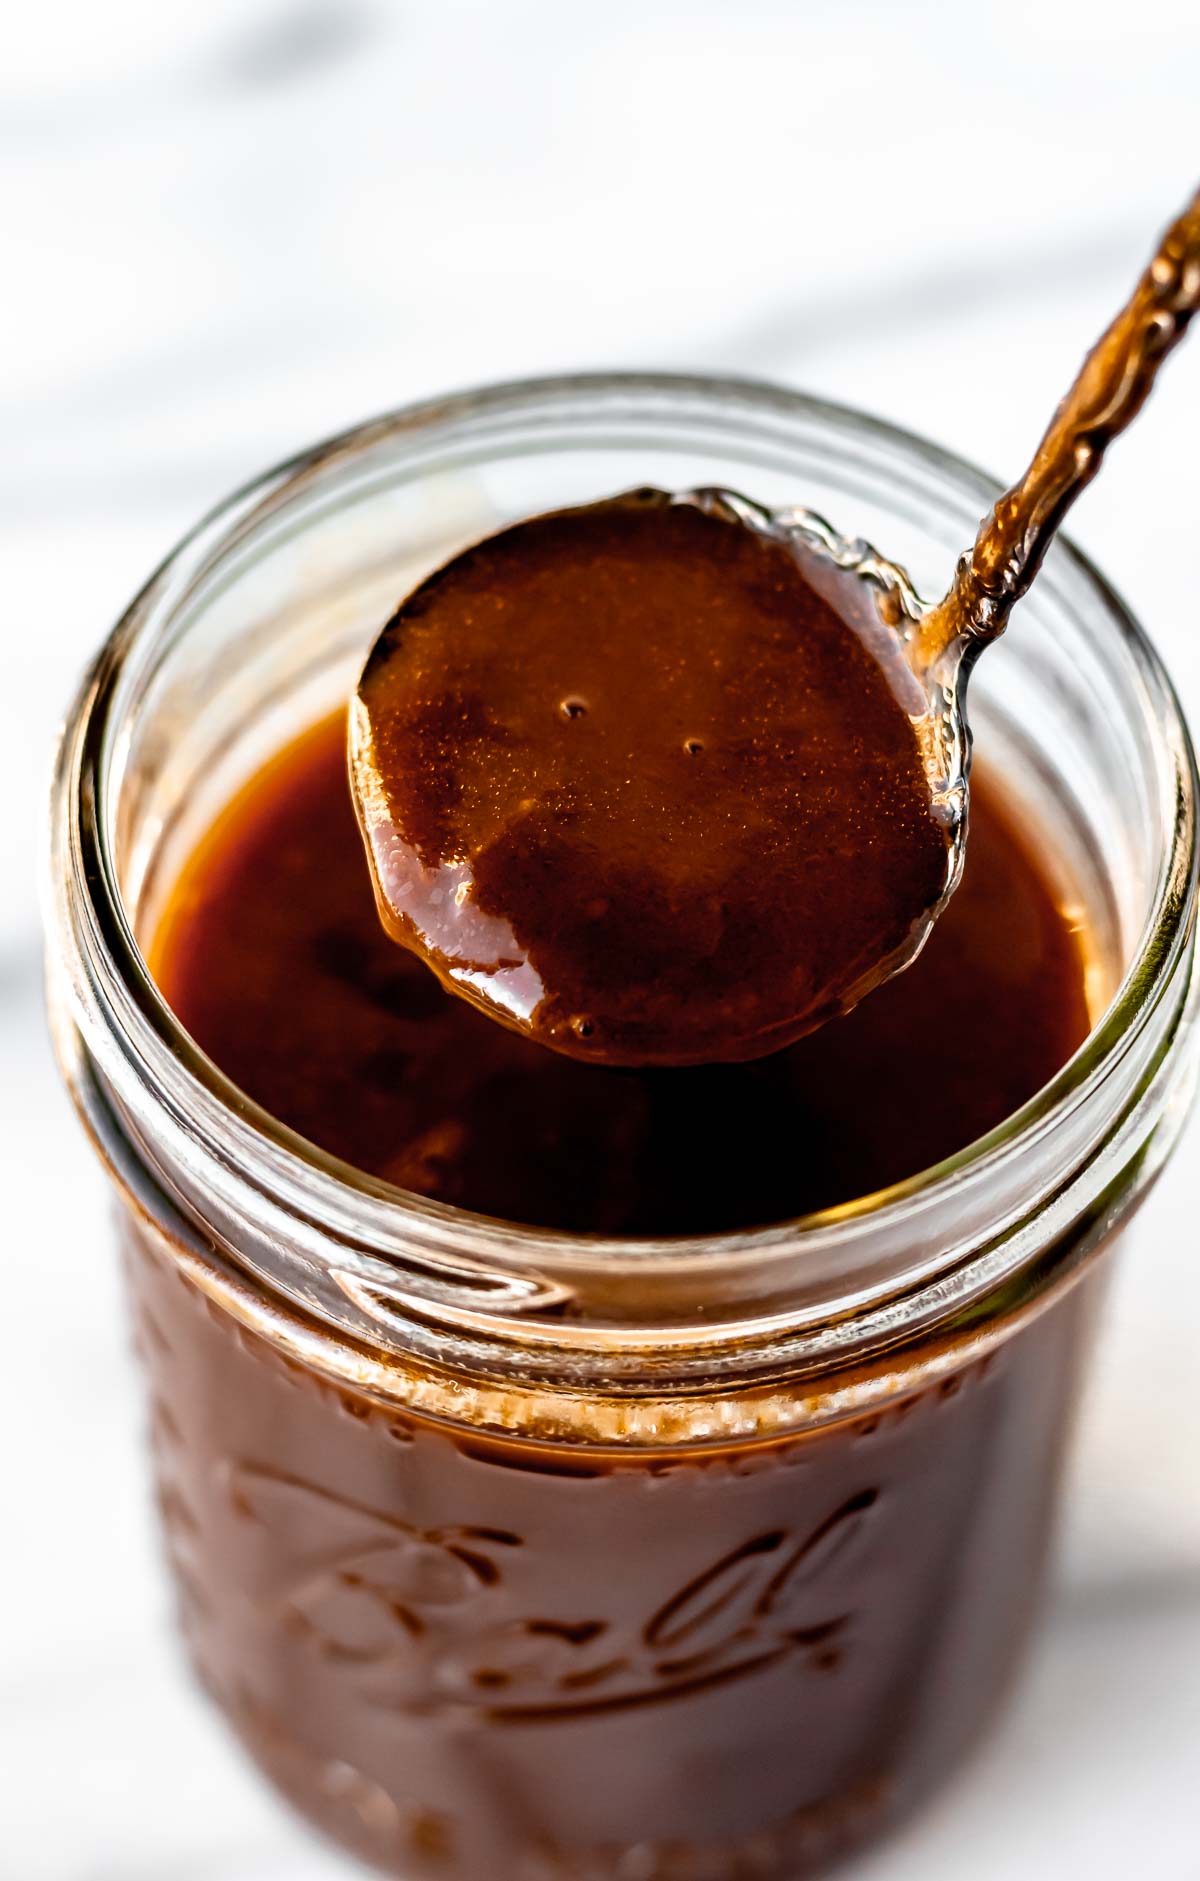 Demi-glace being lifted up with a spoon over a glass jar.